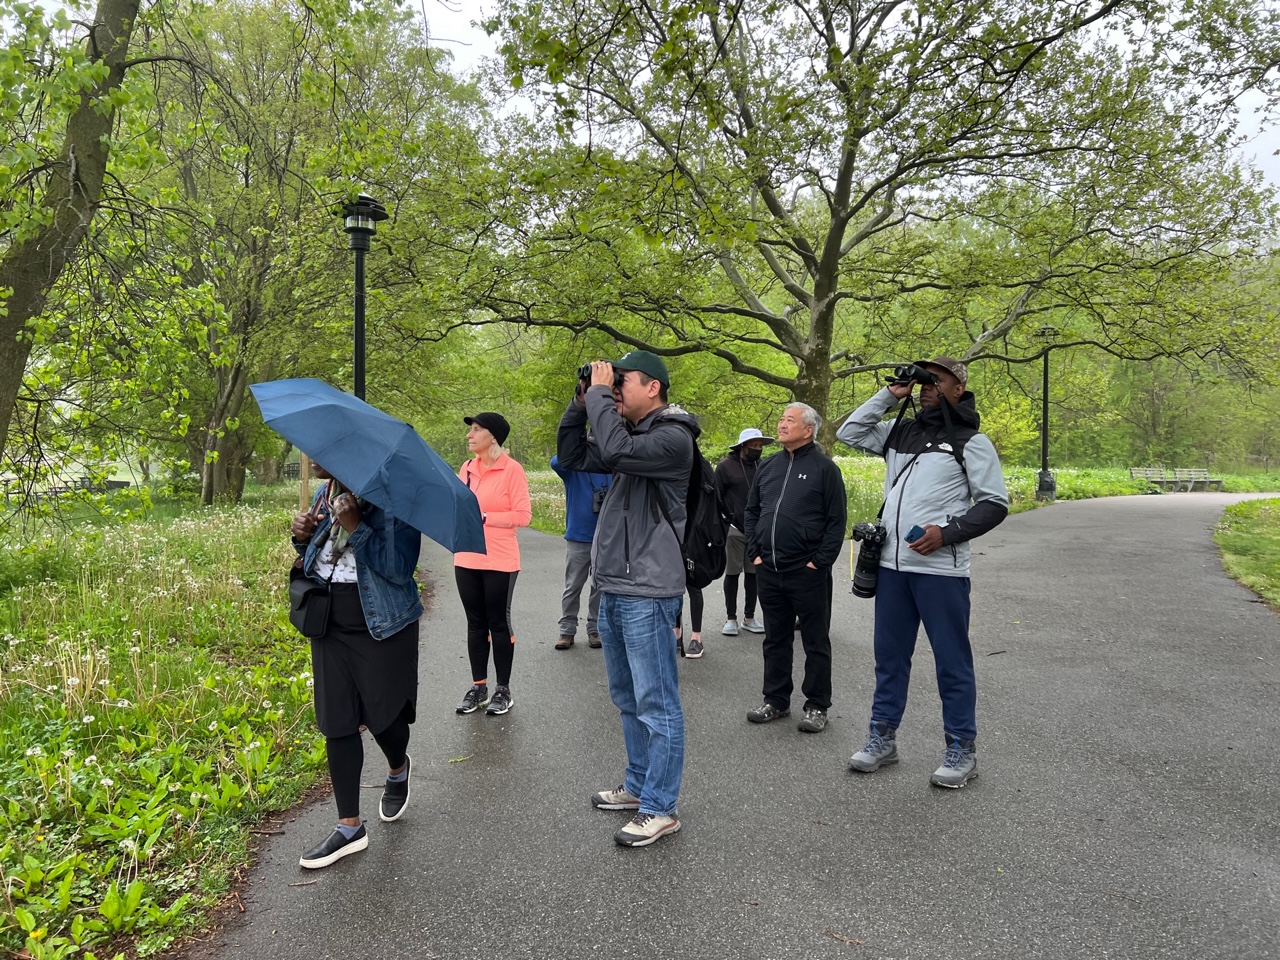 Mike Yuan, center, peers through the rain and mist to find sightings of songbirds in the distance.